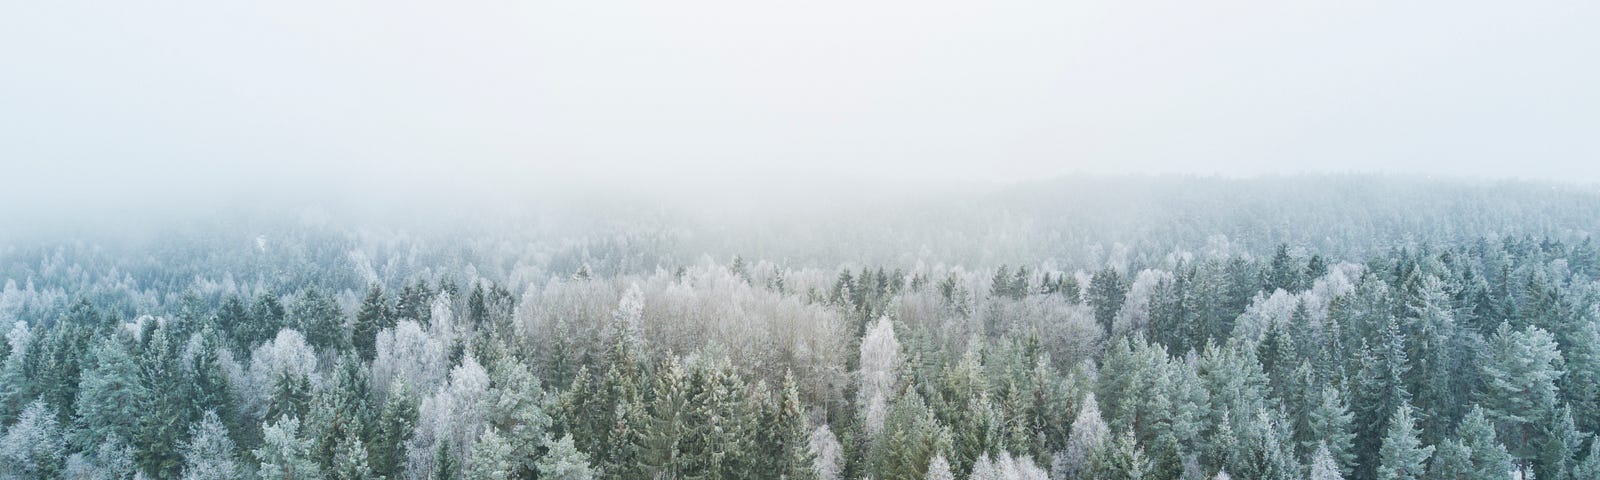 Pine tree forest from above, covered in snow.